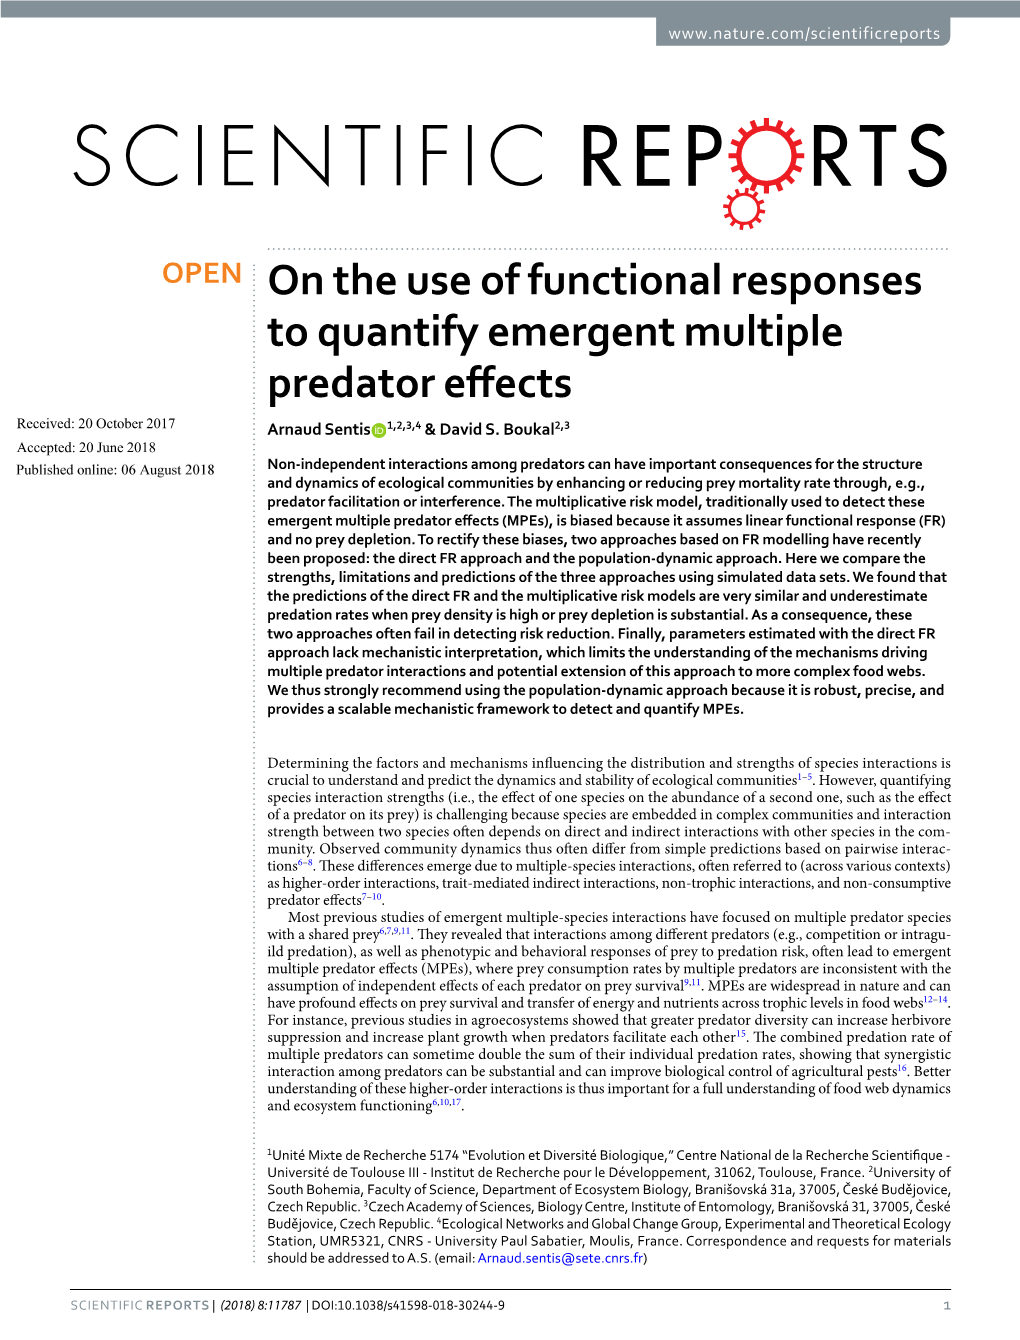 On the Use of Functional Responses to Quantify Emergent Multiple Predator Efects Received: 20 October 2017 Arnaud Sentis 1,2,3,4 & David S